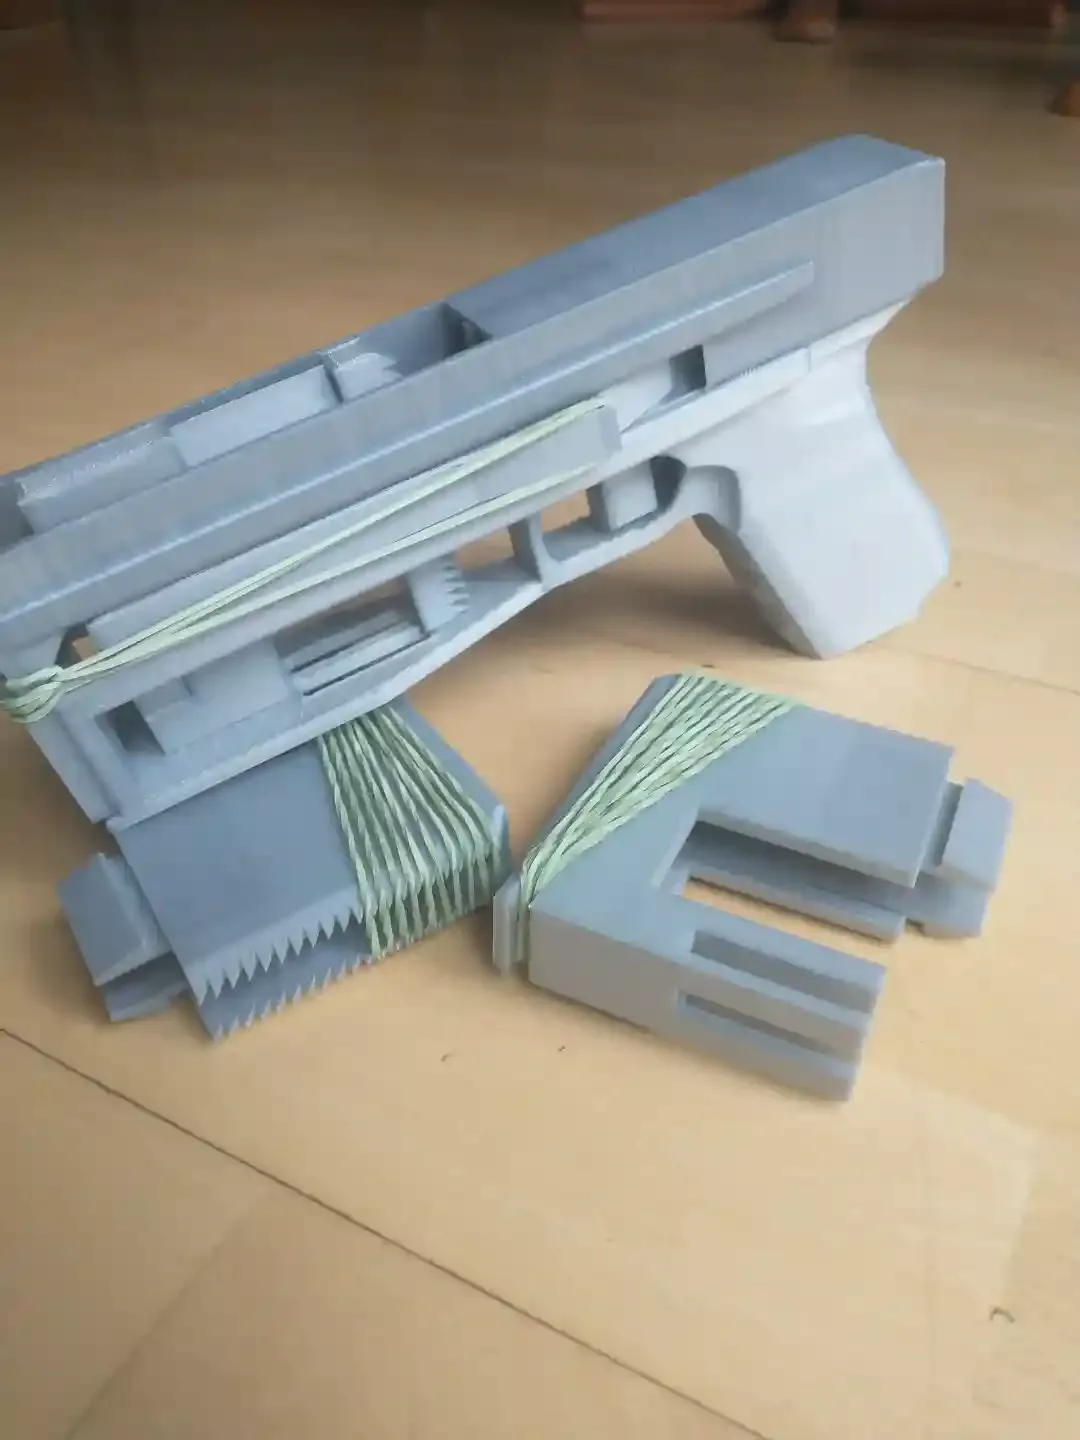 V2 Rubber band gun with mag